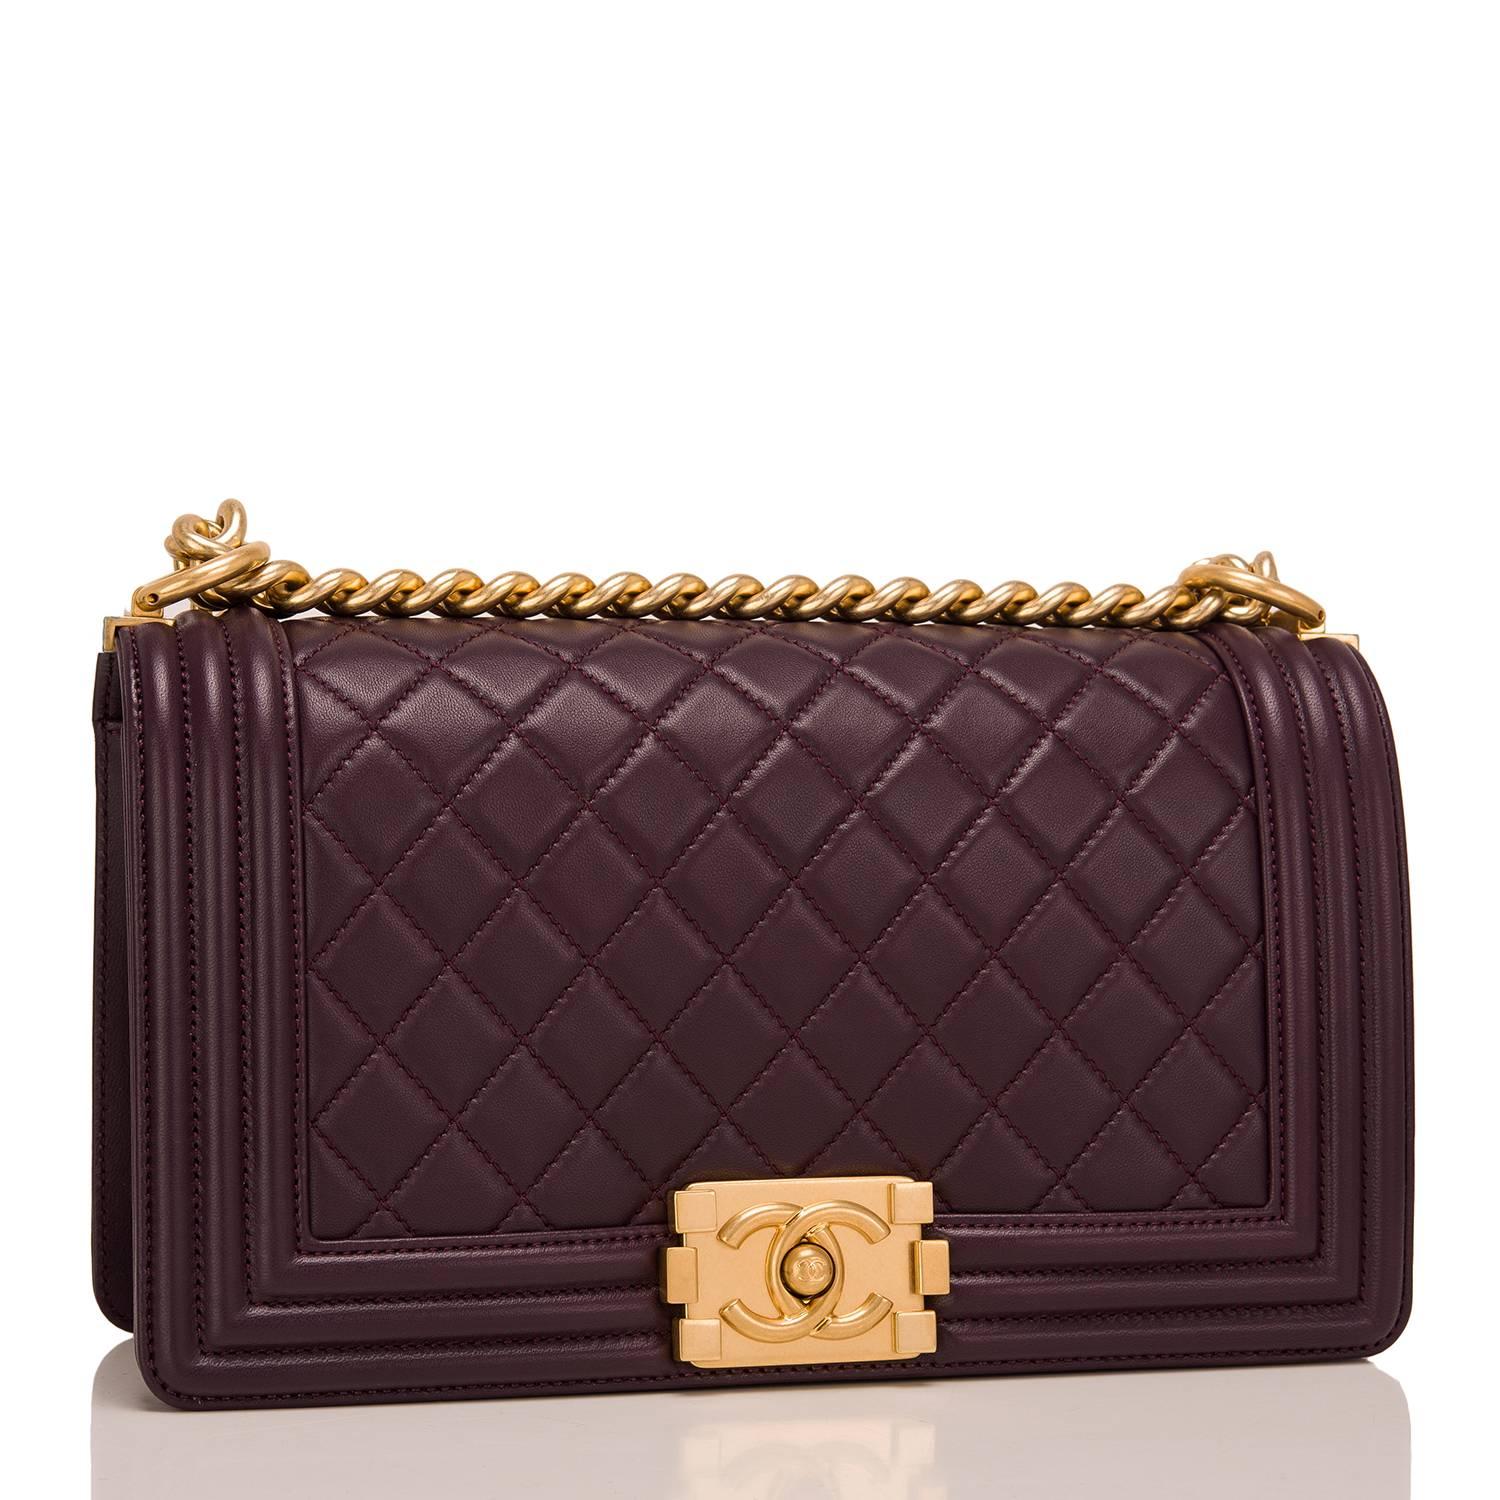 Chanel Old Medium Boy bag of dark purple quilted lambskin and gold hardware.

This Chanel bag is in the classic Boy style with a full front flap with the Boy signature CC push lock closure detail and gold chain link and dark purple leather padded